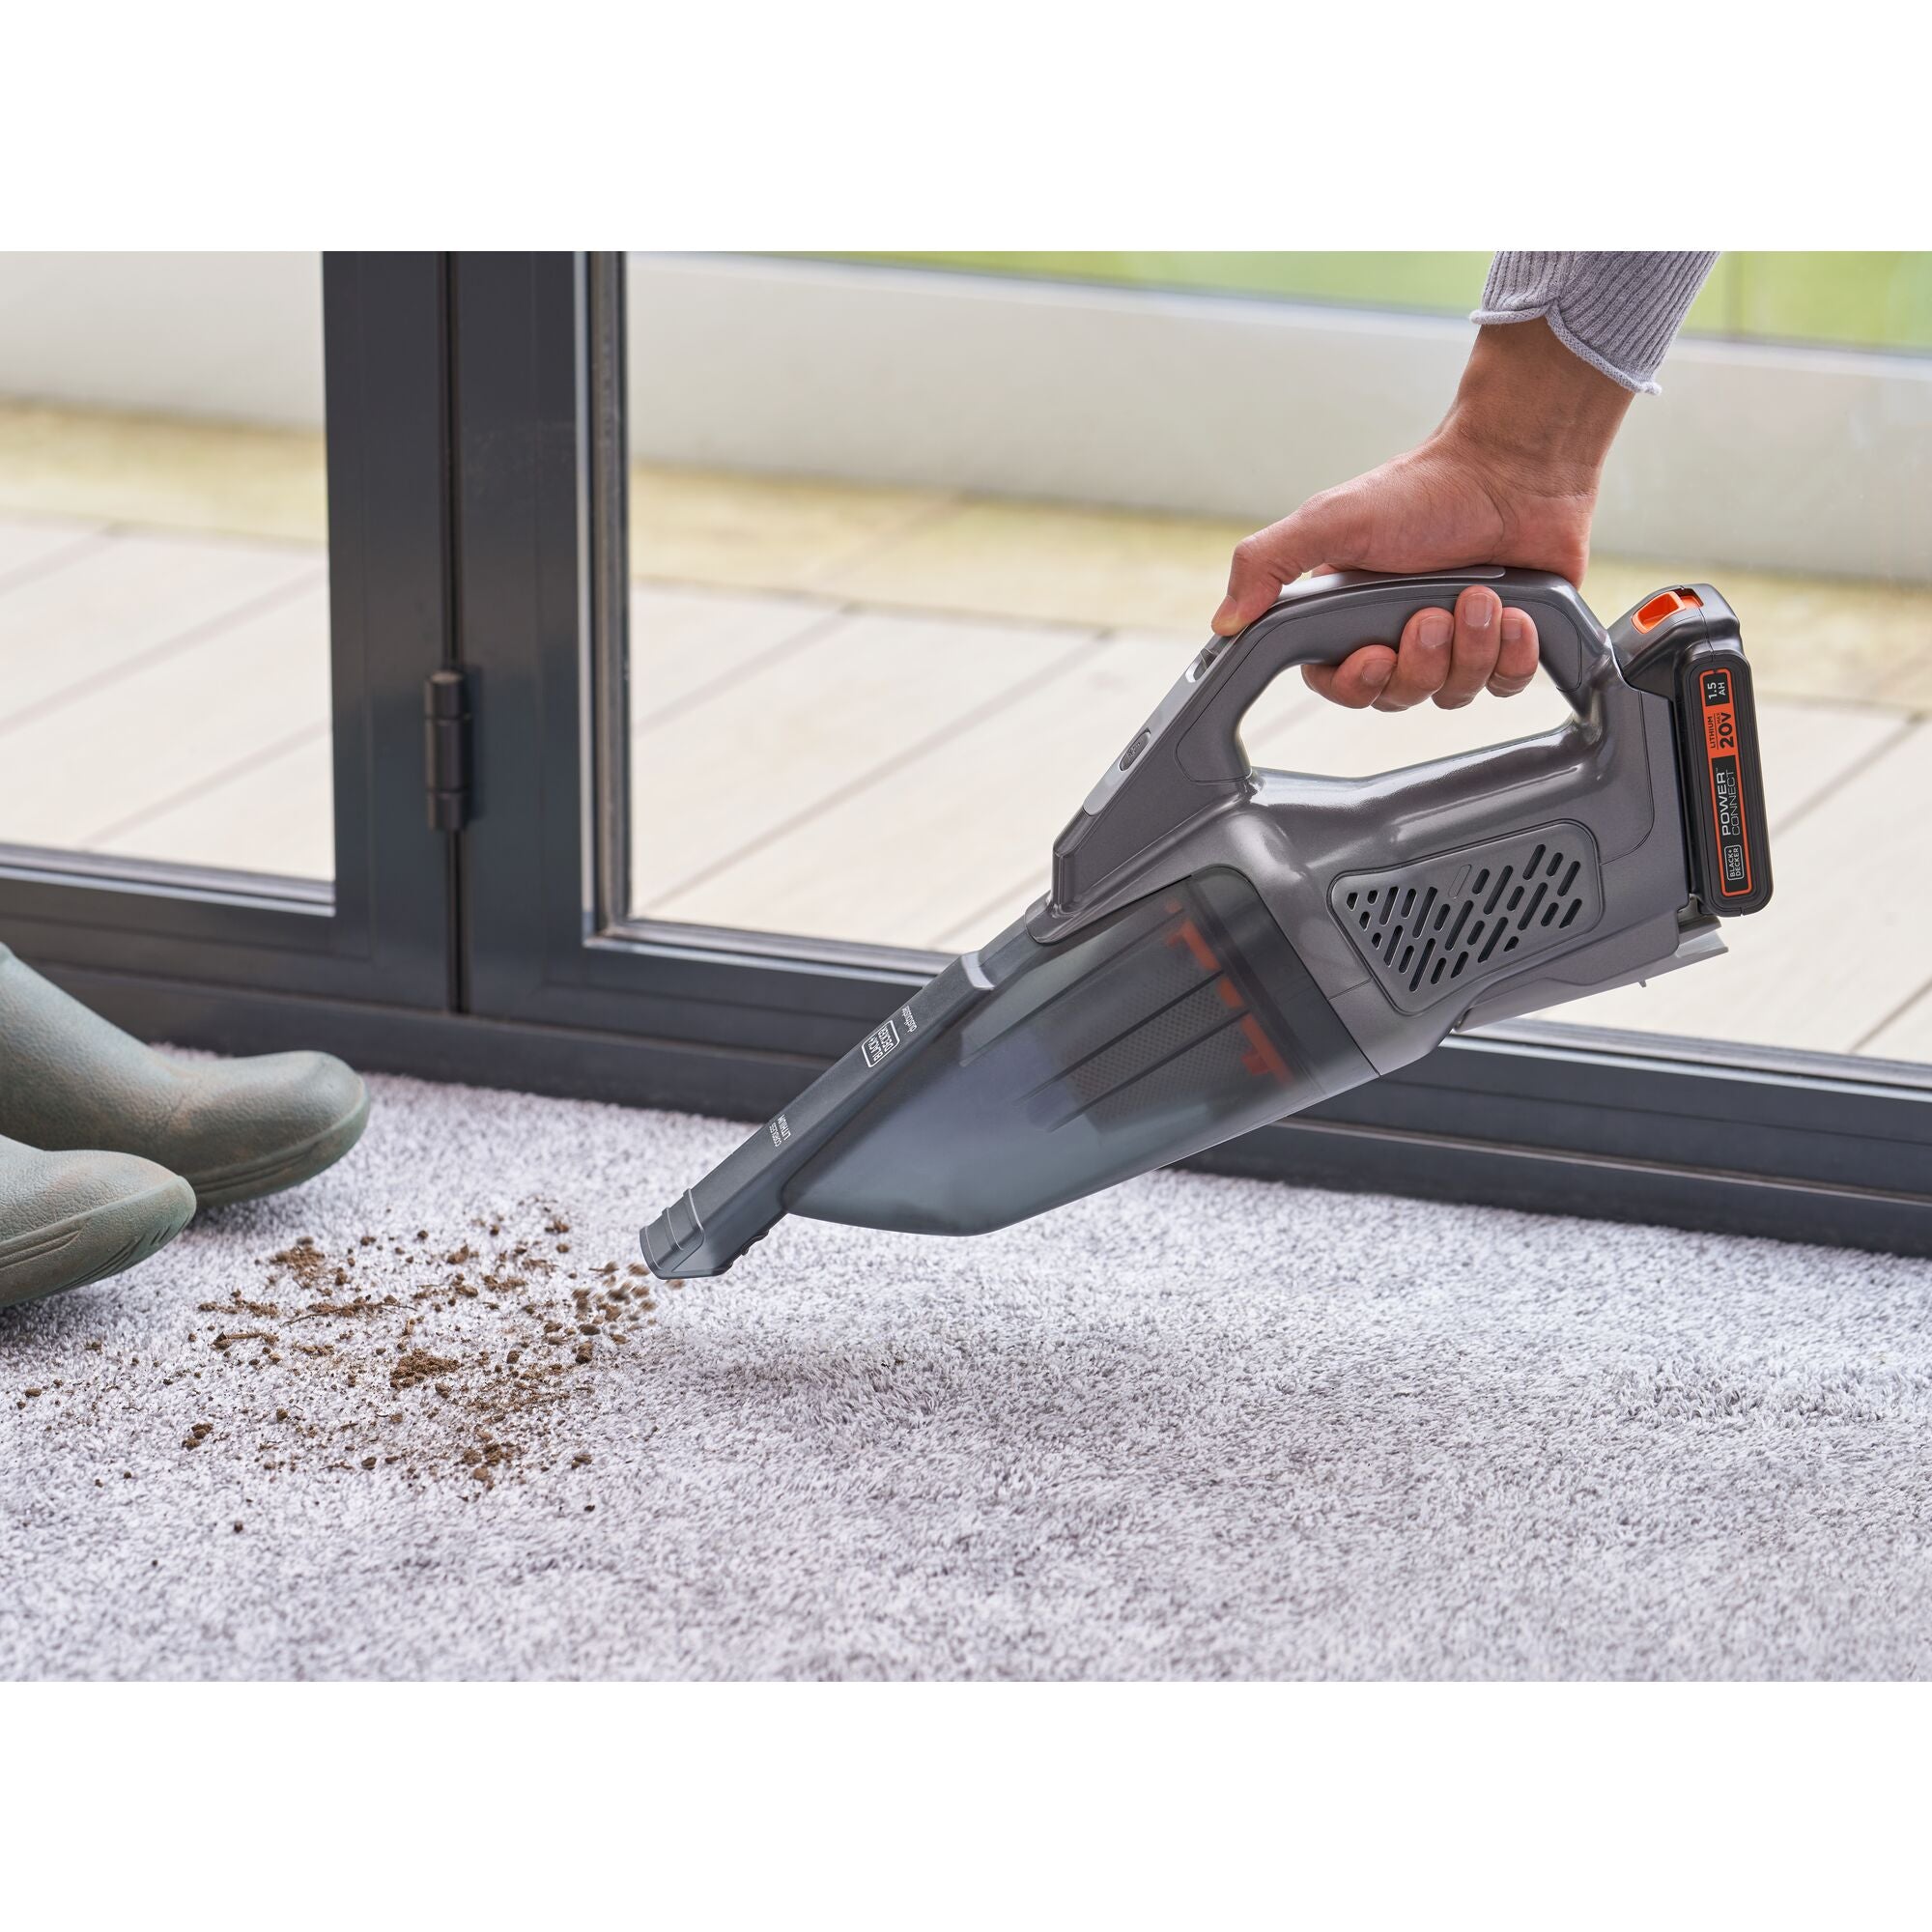 BLACK+DECKER dustbuster® POWERCONNECT™ 20V MAX* Cordless Handheld Vacuum cleaning the spilled soil from the floor.